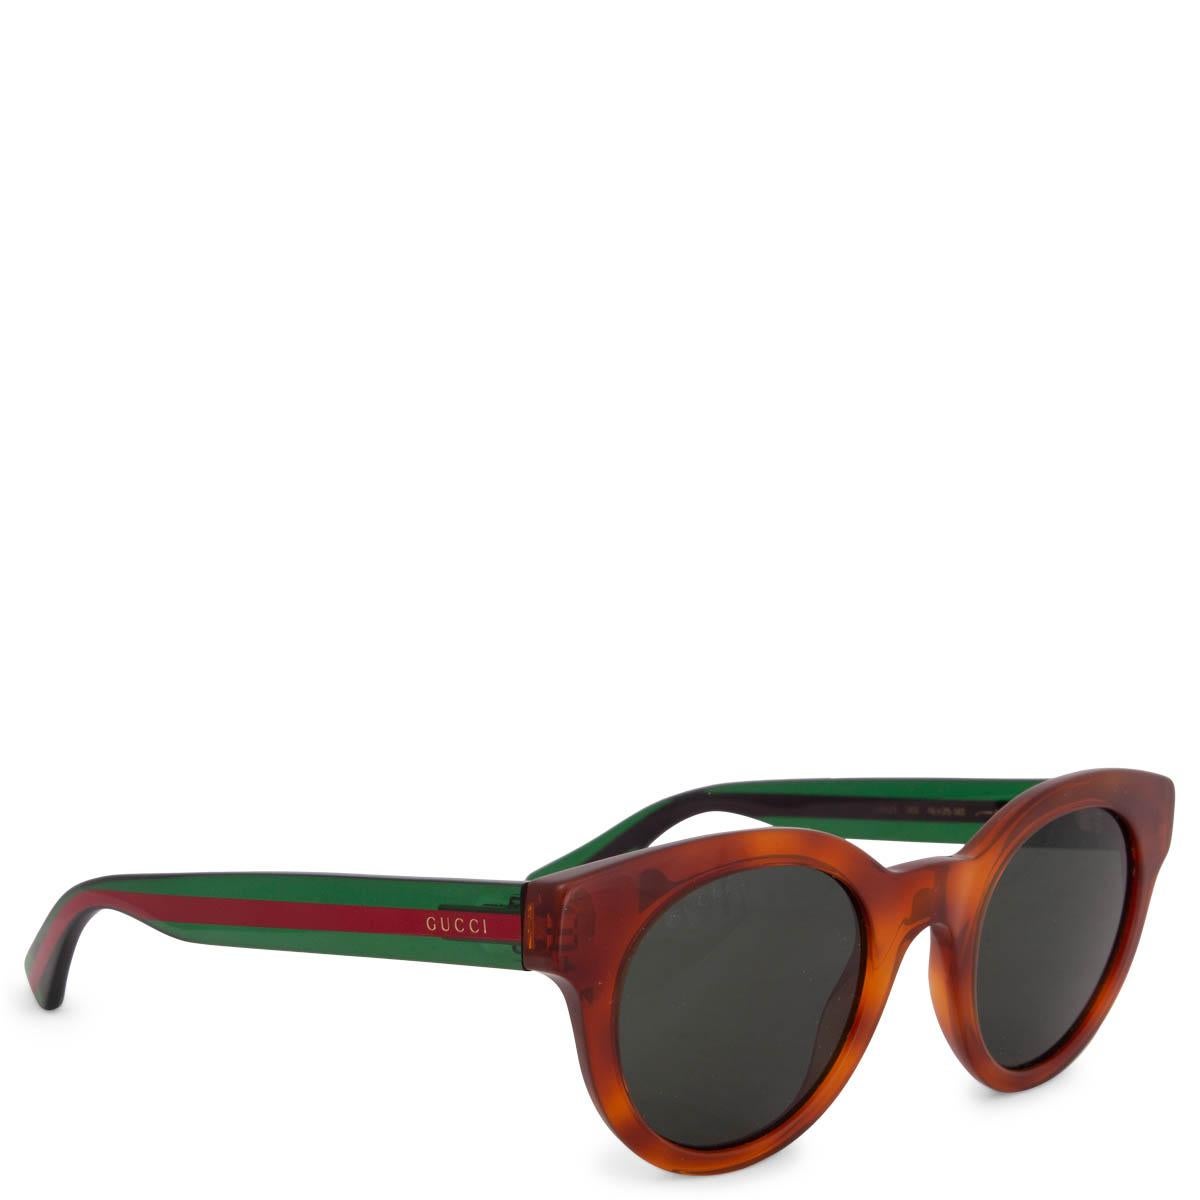 100% authentic Gucci GG0002S Round Tortoiseshell Havana Sunglasses in cognac brown acetate with red and green striped temples and green lenses. Have been worn and are in excellent condition. Come with case. 

Measurements
Model	GG0002S
Width	13.5cm